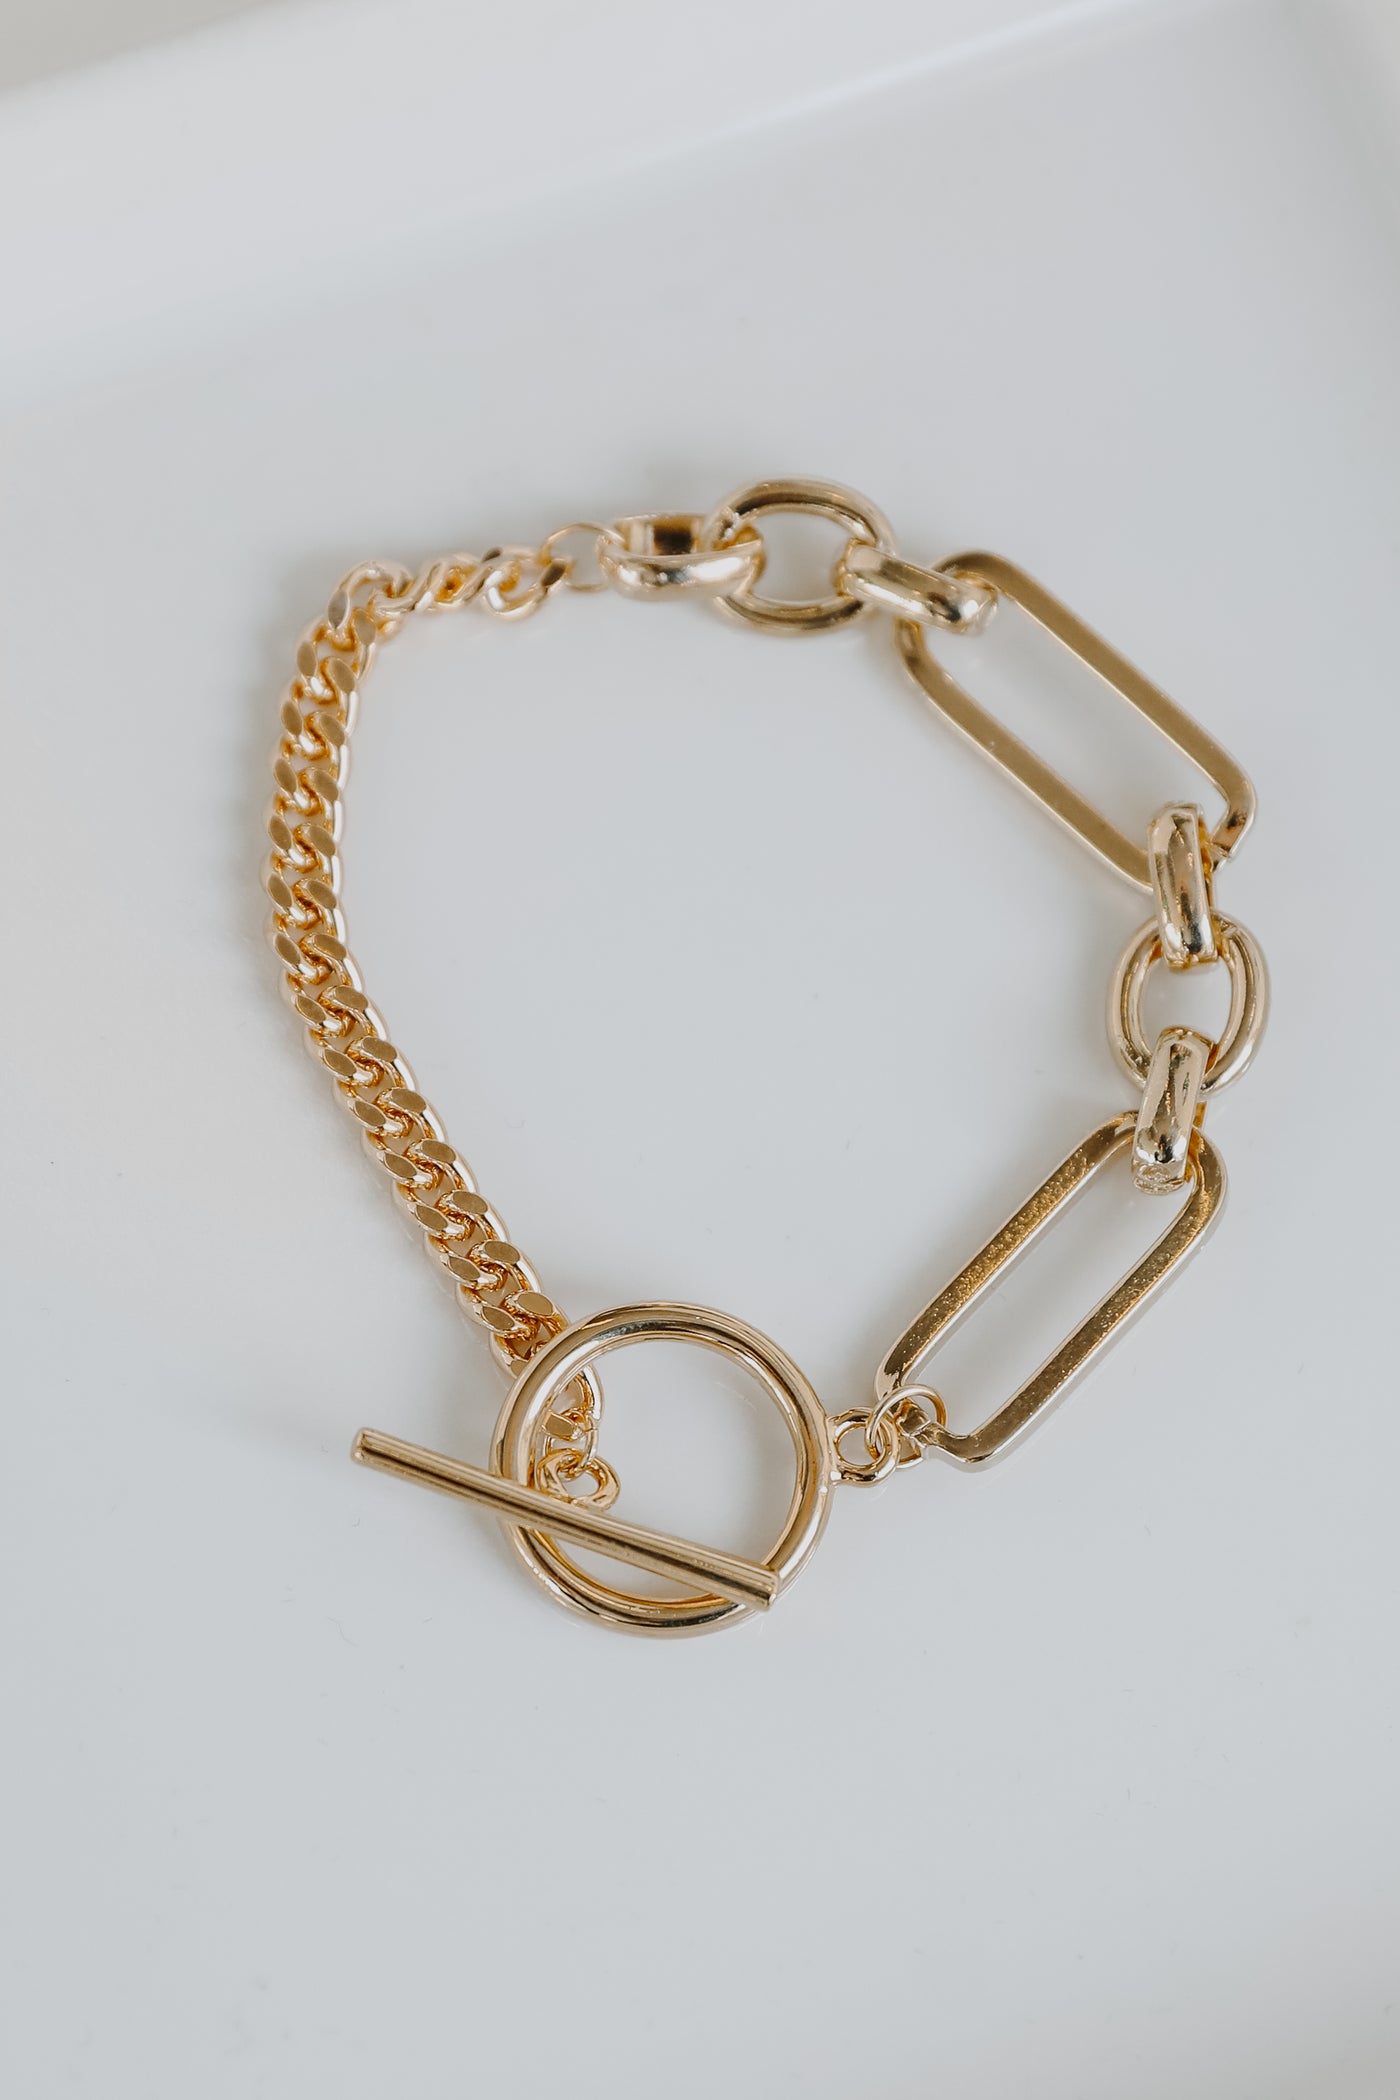 Gold Chain Bracelet from dress up